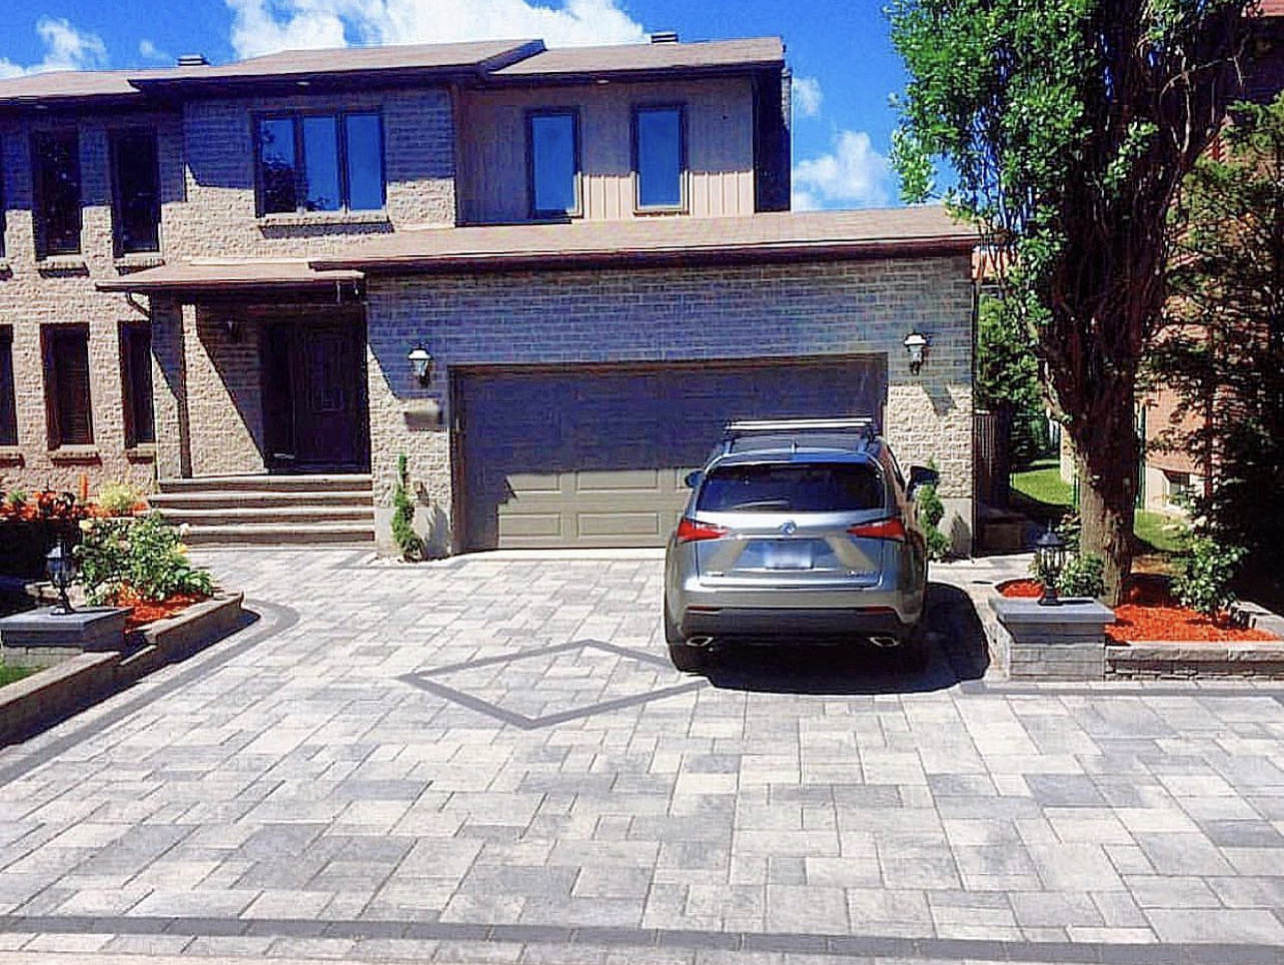 #1 best certified pavers contractor milton. Interlocking Paver Walkway in Milton, ON custom paver patio expert in milton, ON. Driveway expert in milton ontario. outdoor living specialist in milton ON Pavers intallation company in milton, on. Paver patio & driveway pavers. Top-choice for all your outdoor living needs. Certified pavers contractor. milton ontario paver professional. Milton Stone, best pavers contractor in oakville ON, oakville driveway pavers installation company, deriveway repair servies in oakville ontario, techo bloc installer in oakville, milton stone, custom paver driveway expert oakville, driveway extension milton ontario, best interlock company in oakville, best interlock contractor in milton on,